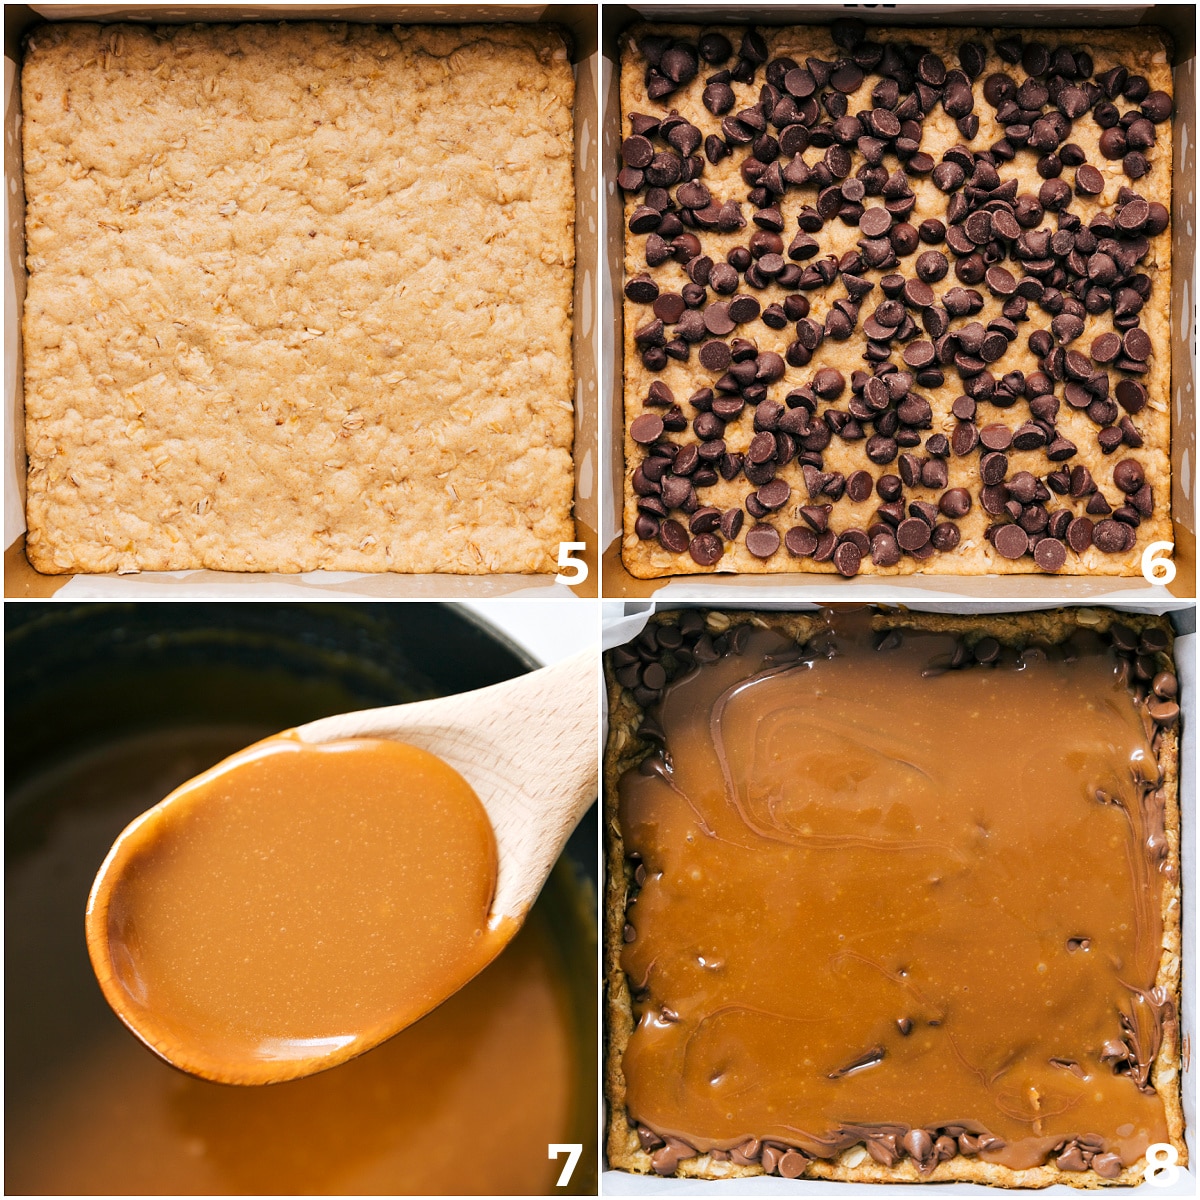 The chocolate chips and caramel being added into the par baked oatmeal base for this carmelita recipe.